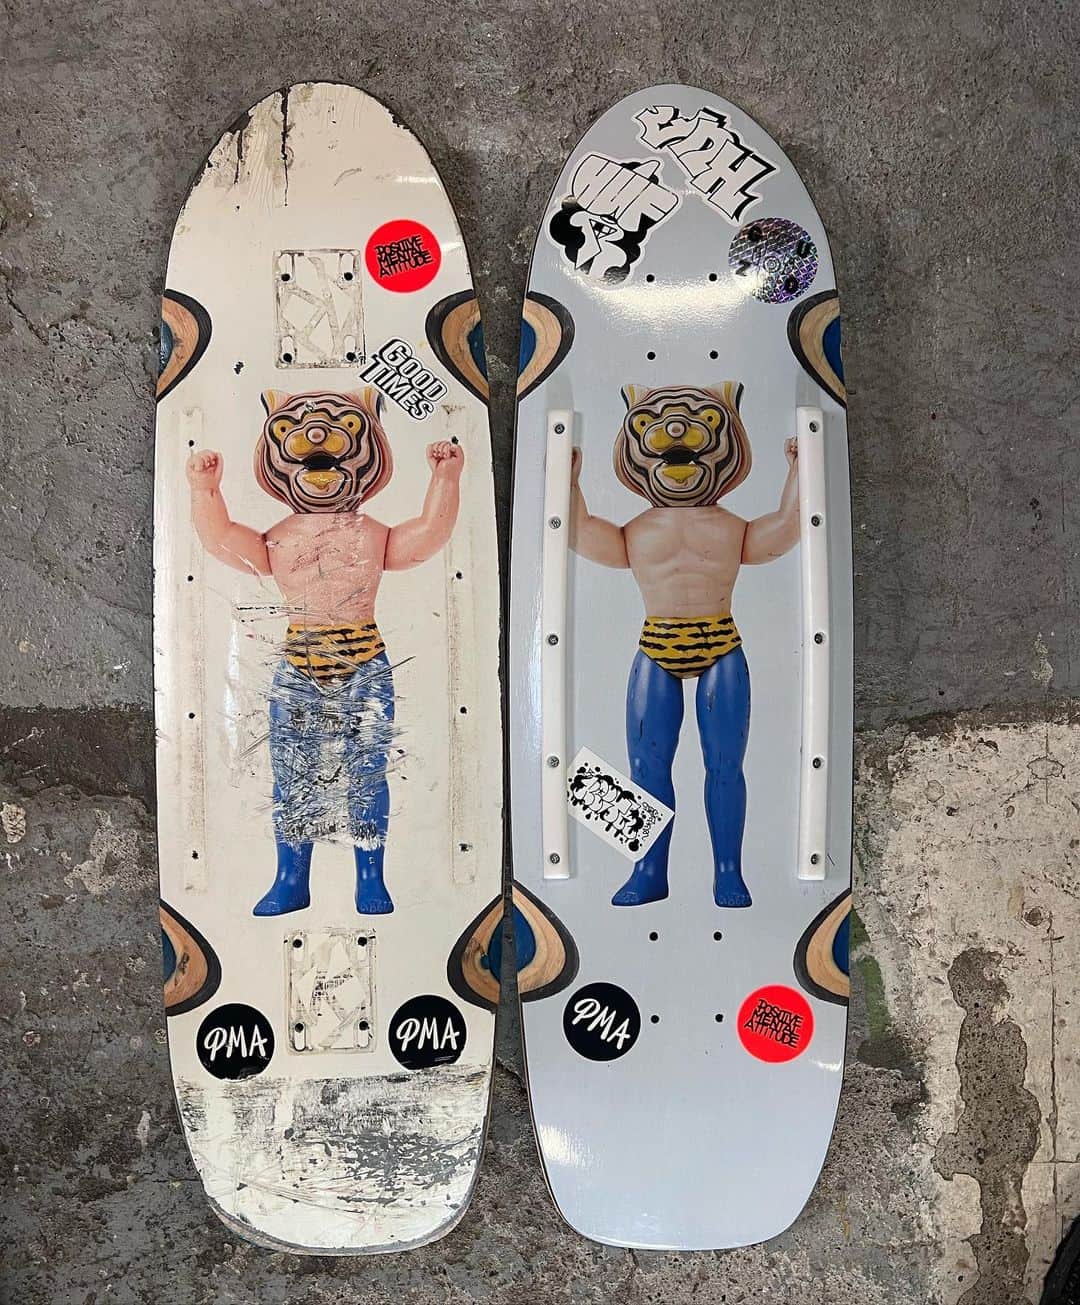 HAROSHIのインスタグラム：「From 2019 to 2022.   I've been using the one board for three years, including last year when I had a broken bone. When I was a teenager, I had to change the deck every few months, but now I don't even know when to change it. But even if I change it, it's still the same tiger mask deck 😂 And then Old tiger mask deck going to be a part of “mosh pit “ soon 👍」